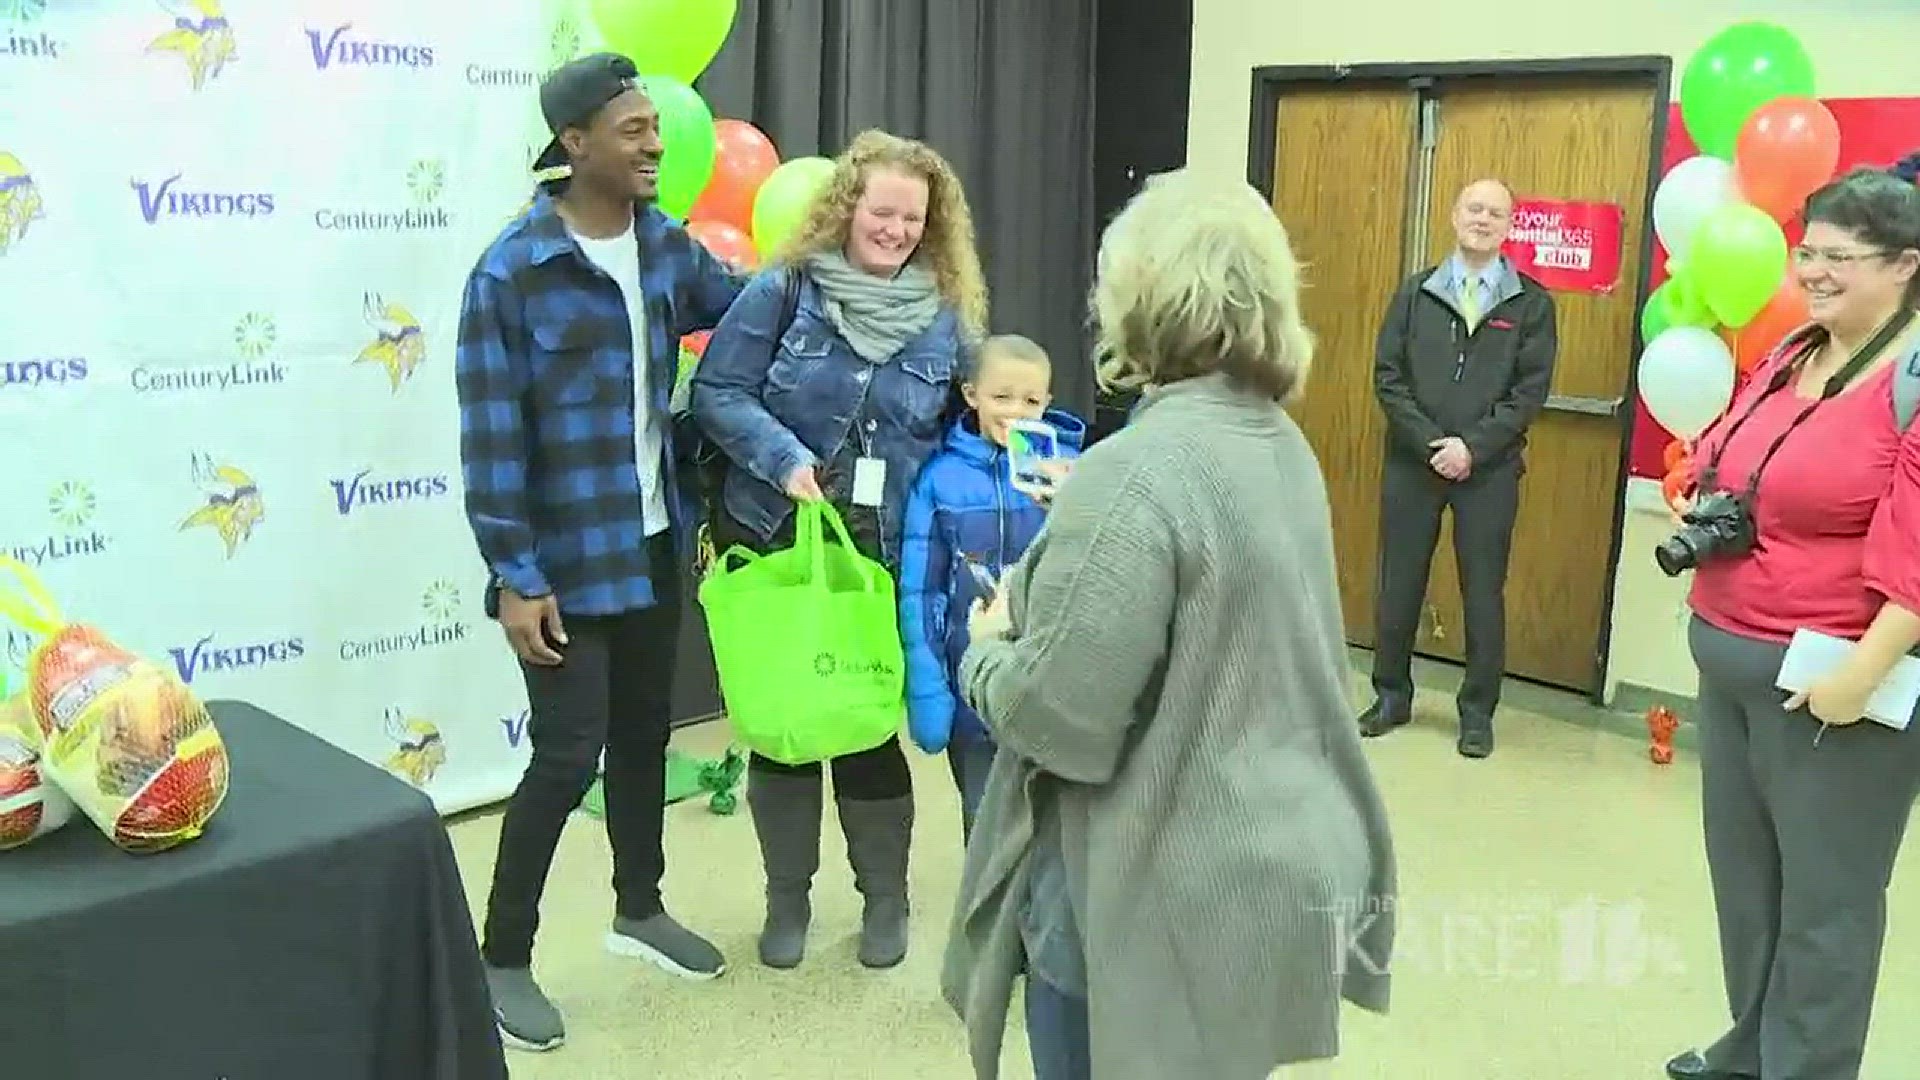 Vikings wide receiver Stefon Diggs teamed up with CenturyLink and Hy-Vee to donate 1,000 turkeys to families on Tuesday night.